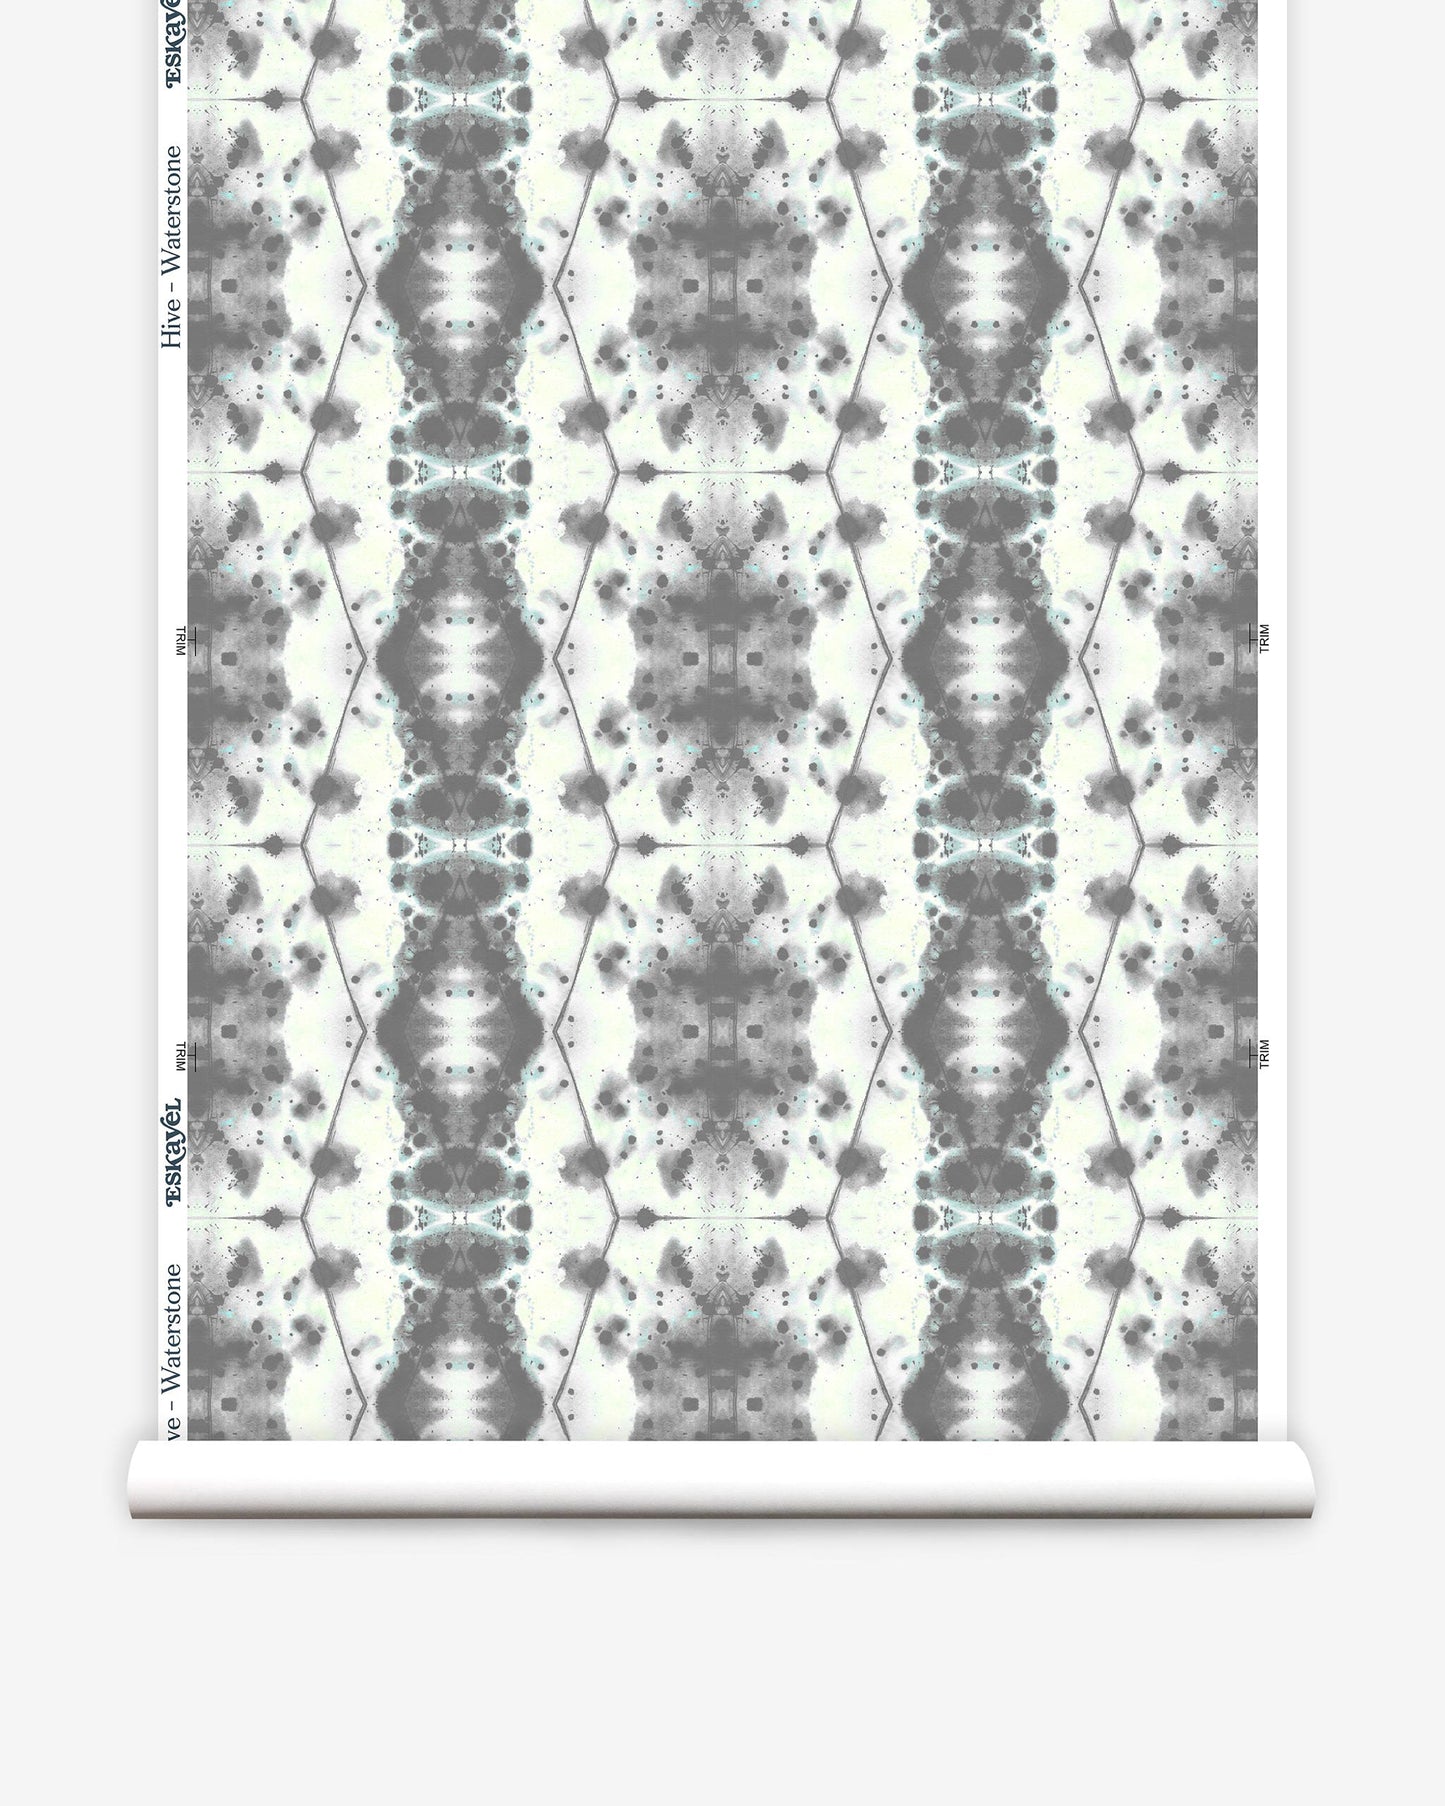 A white and gray Hive Wallpaper with a floral pattern